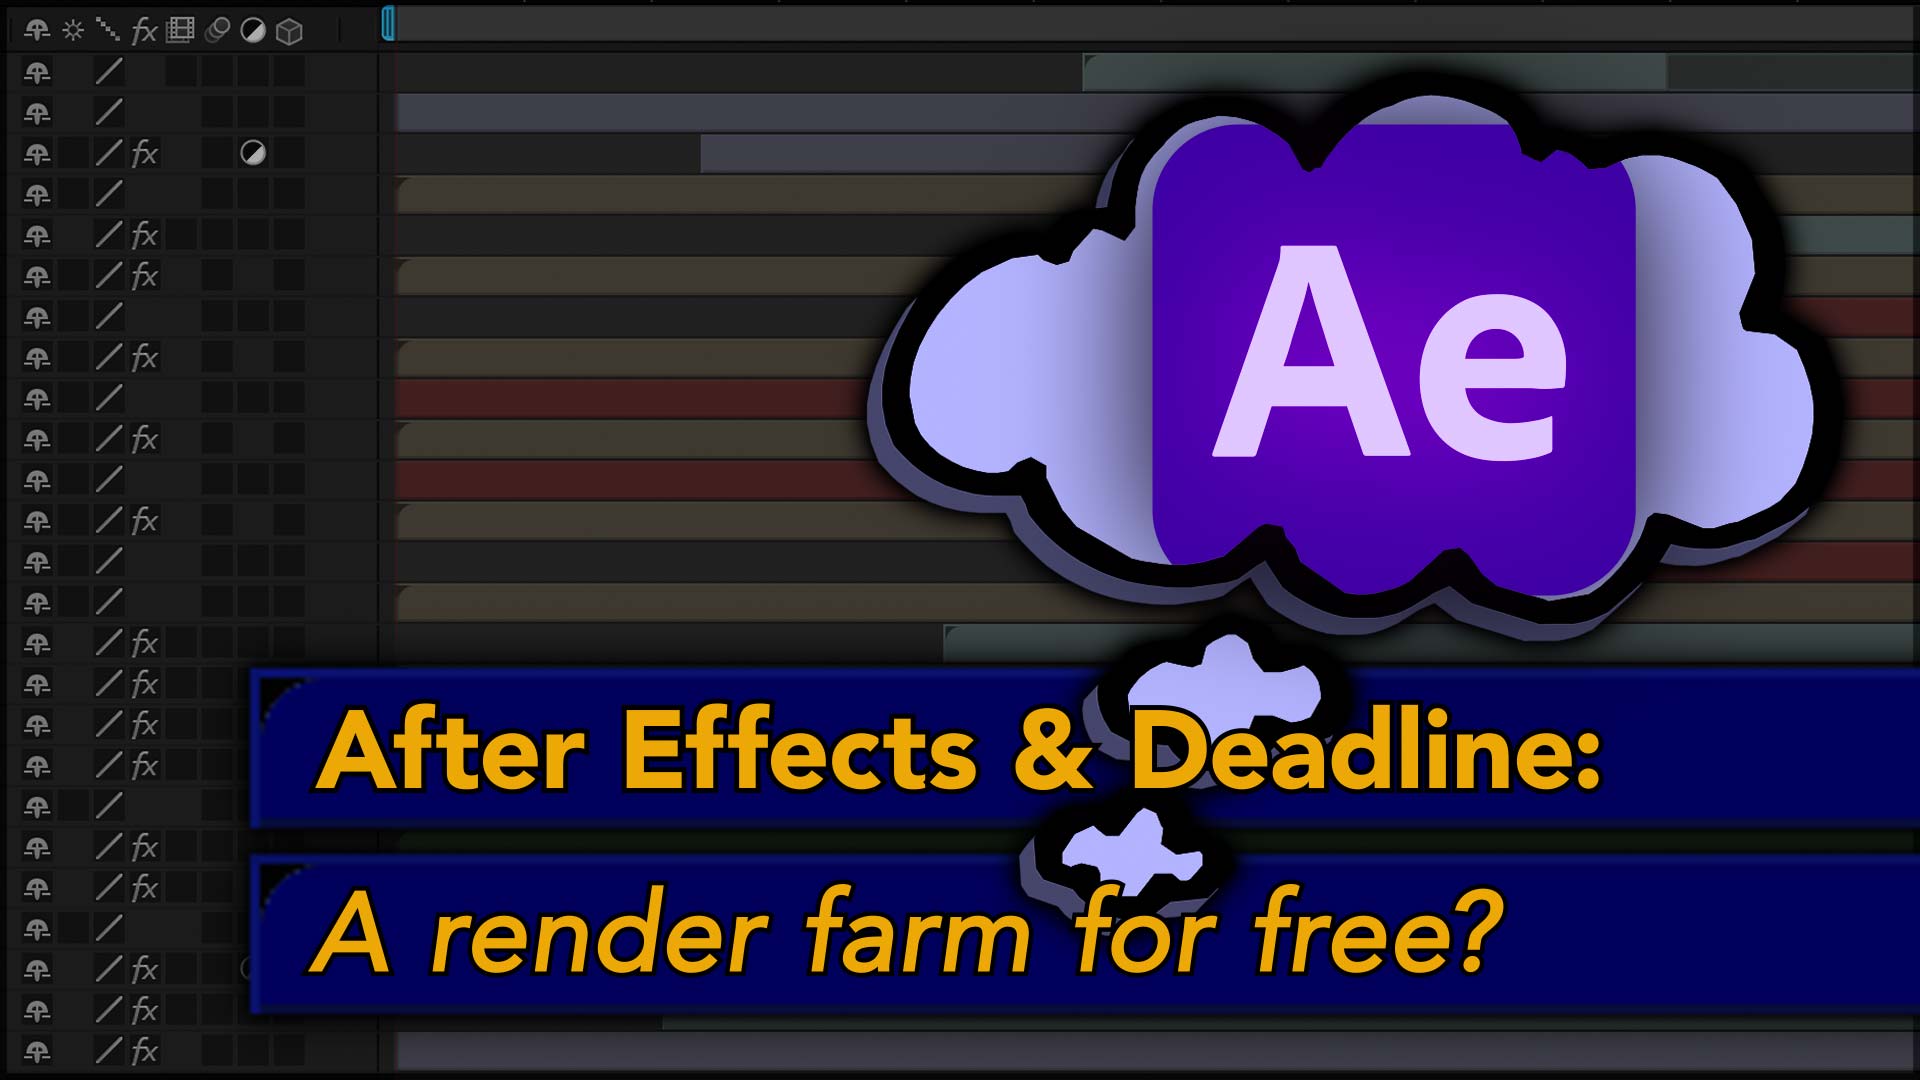 After Effects: Using Deadline for a Render Farm 33